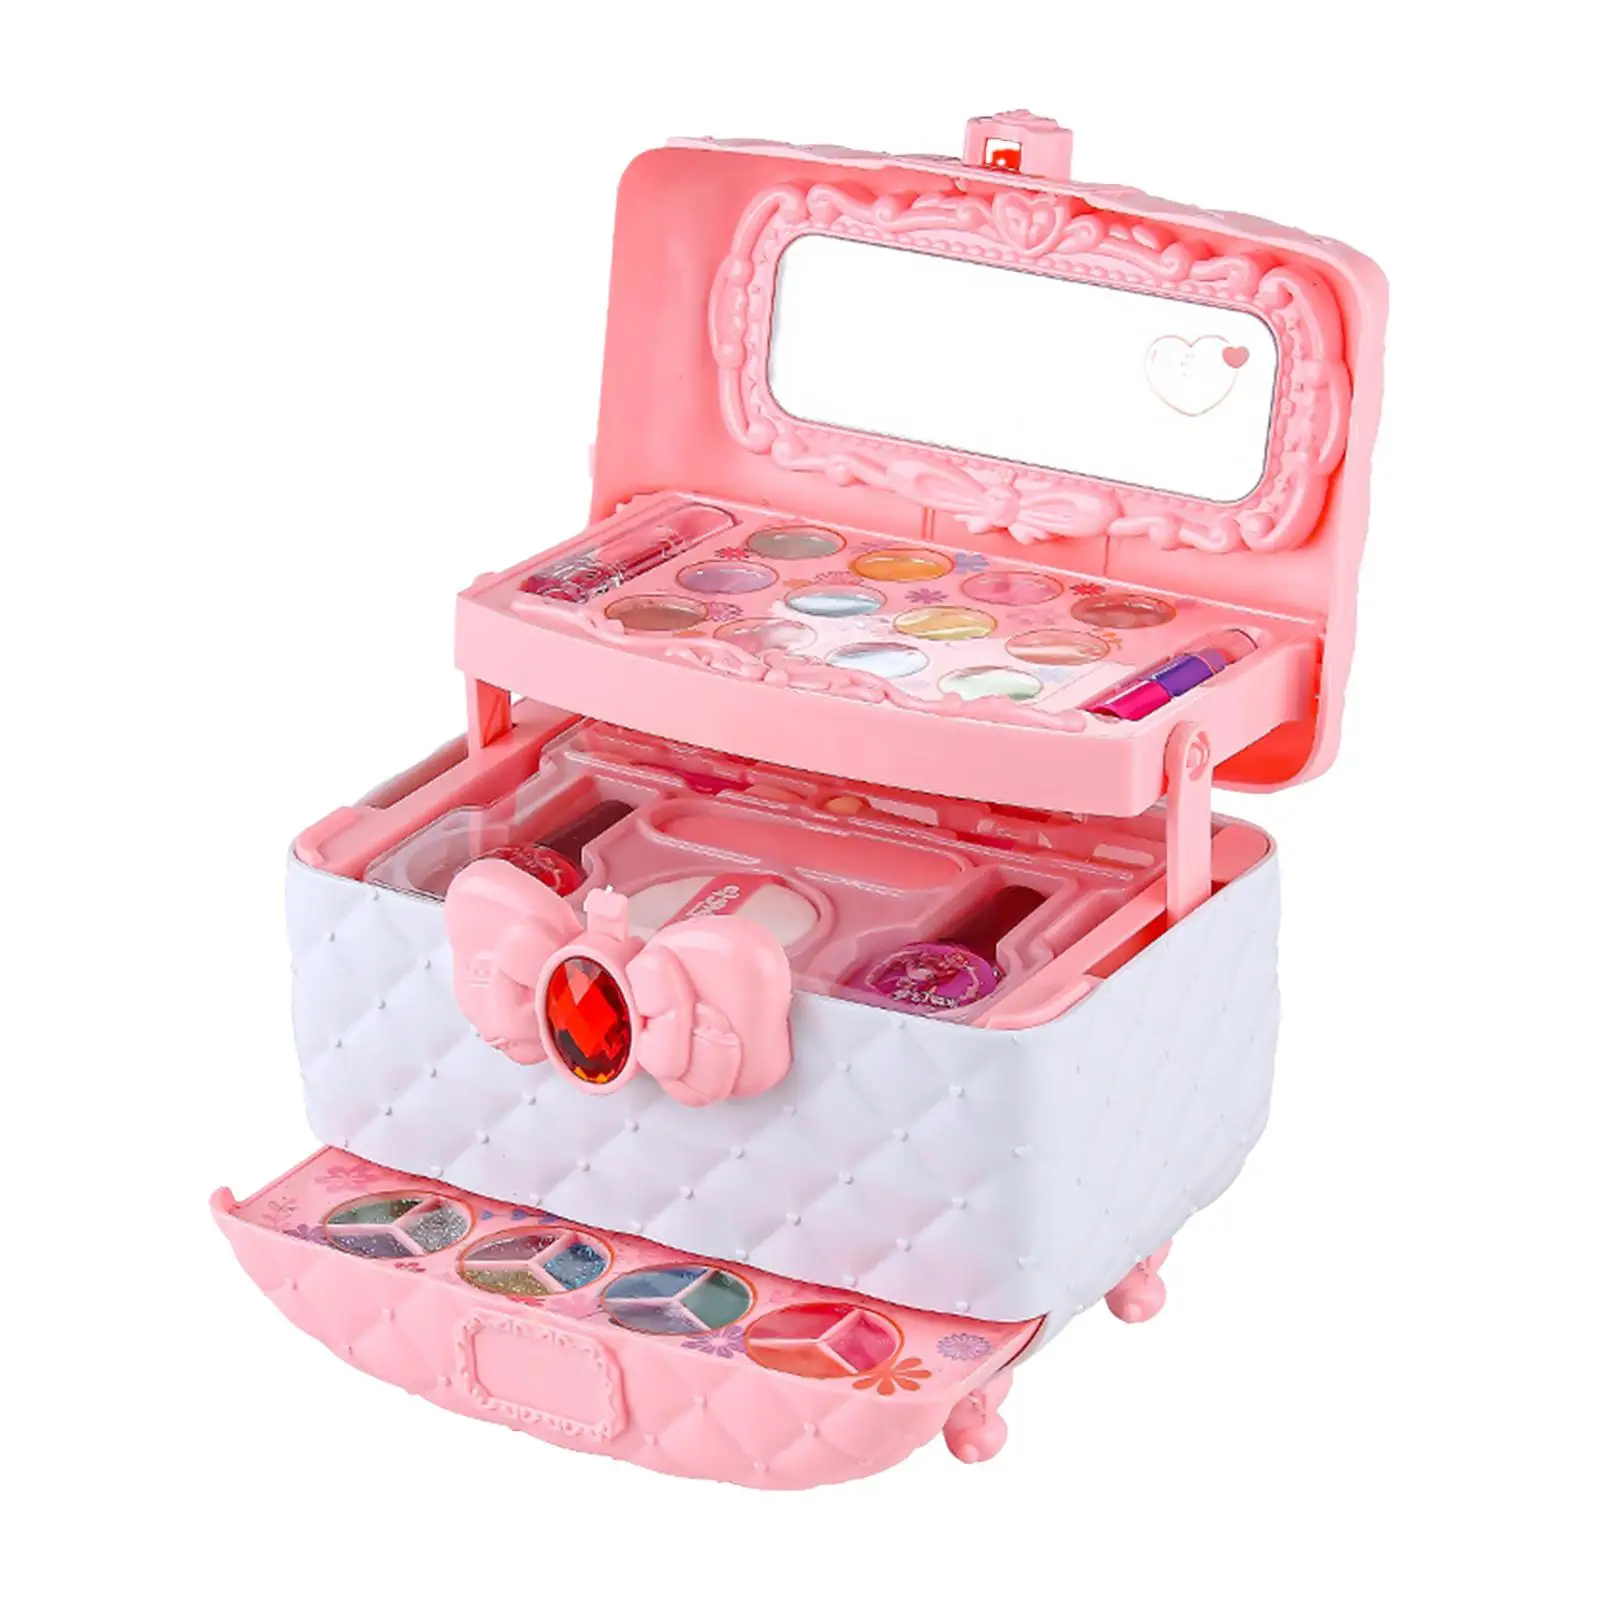 Washable Makeup Set Toy with Mirror Kids Makeup Set for Toddlers Girls Gifts